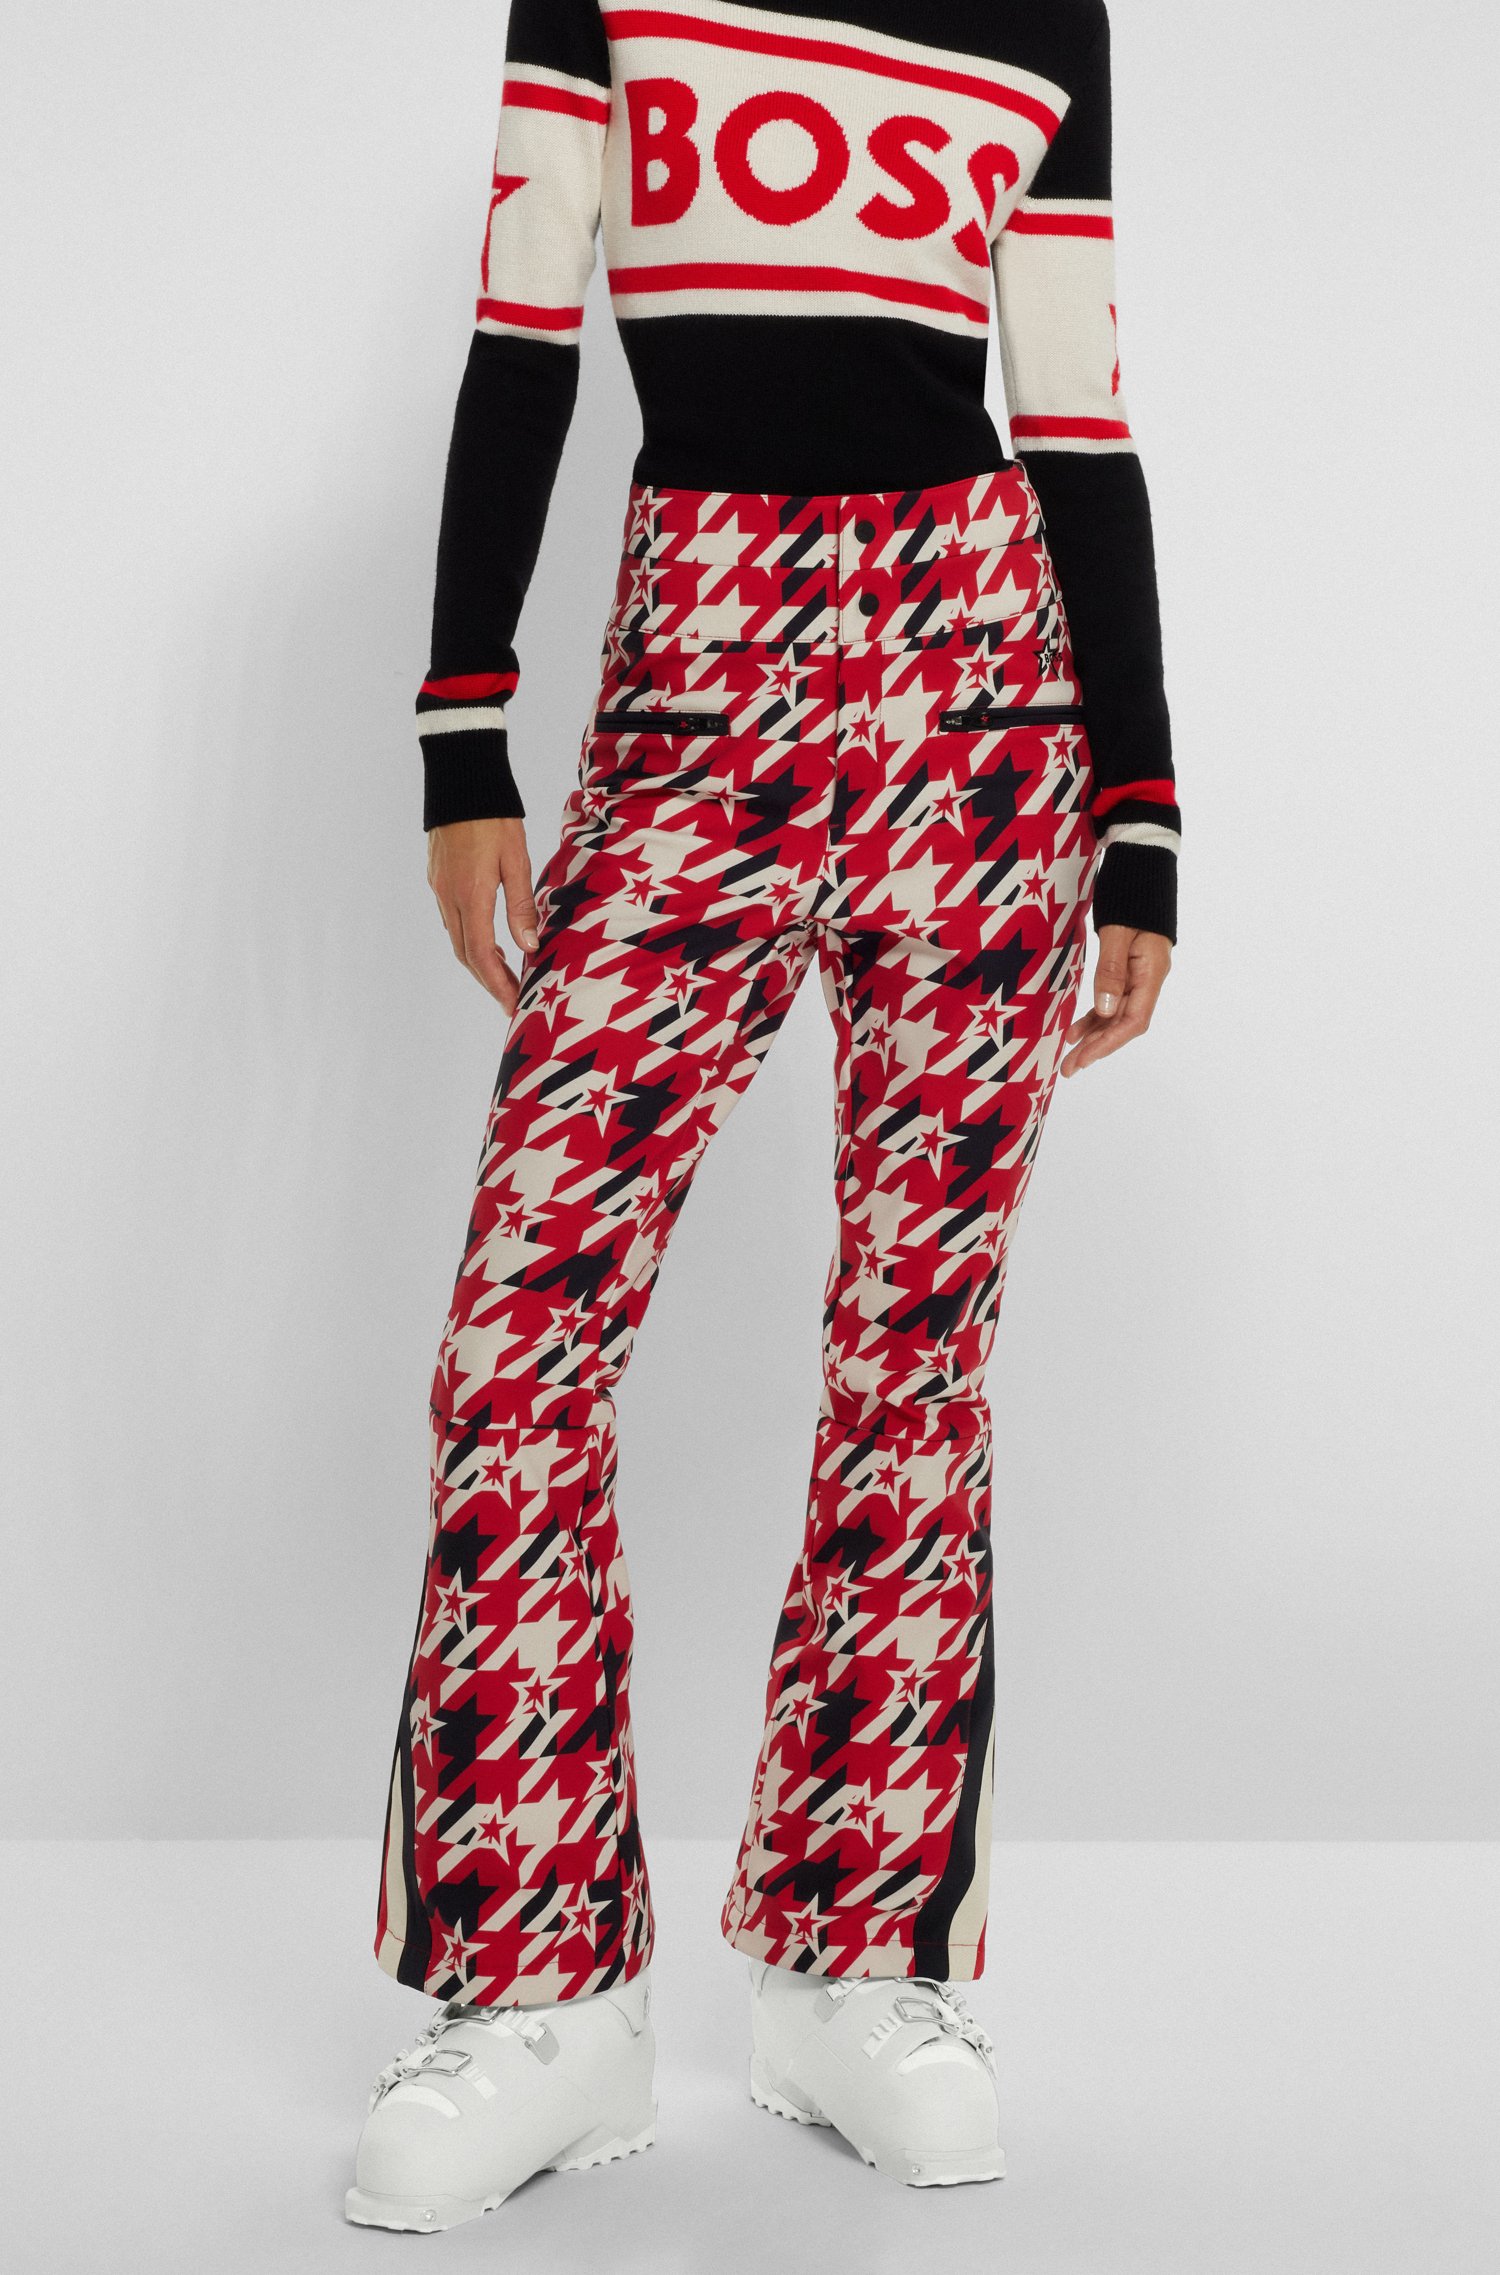 BOSS x Perfect Moment ski trousers with houndstooth motif